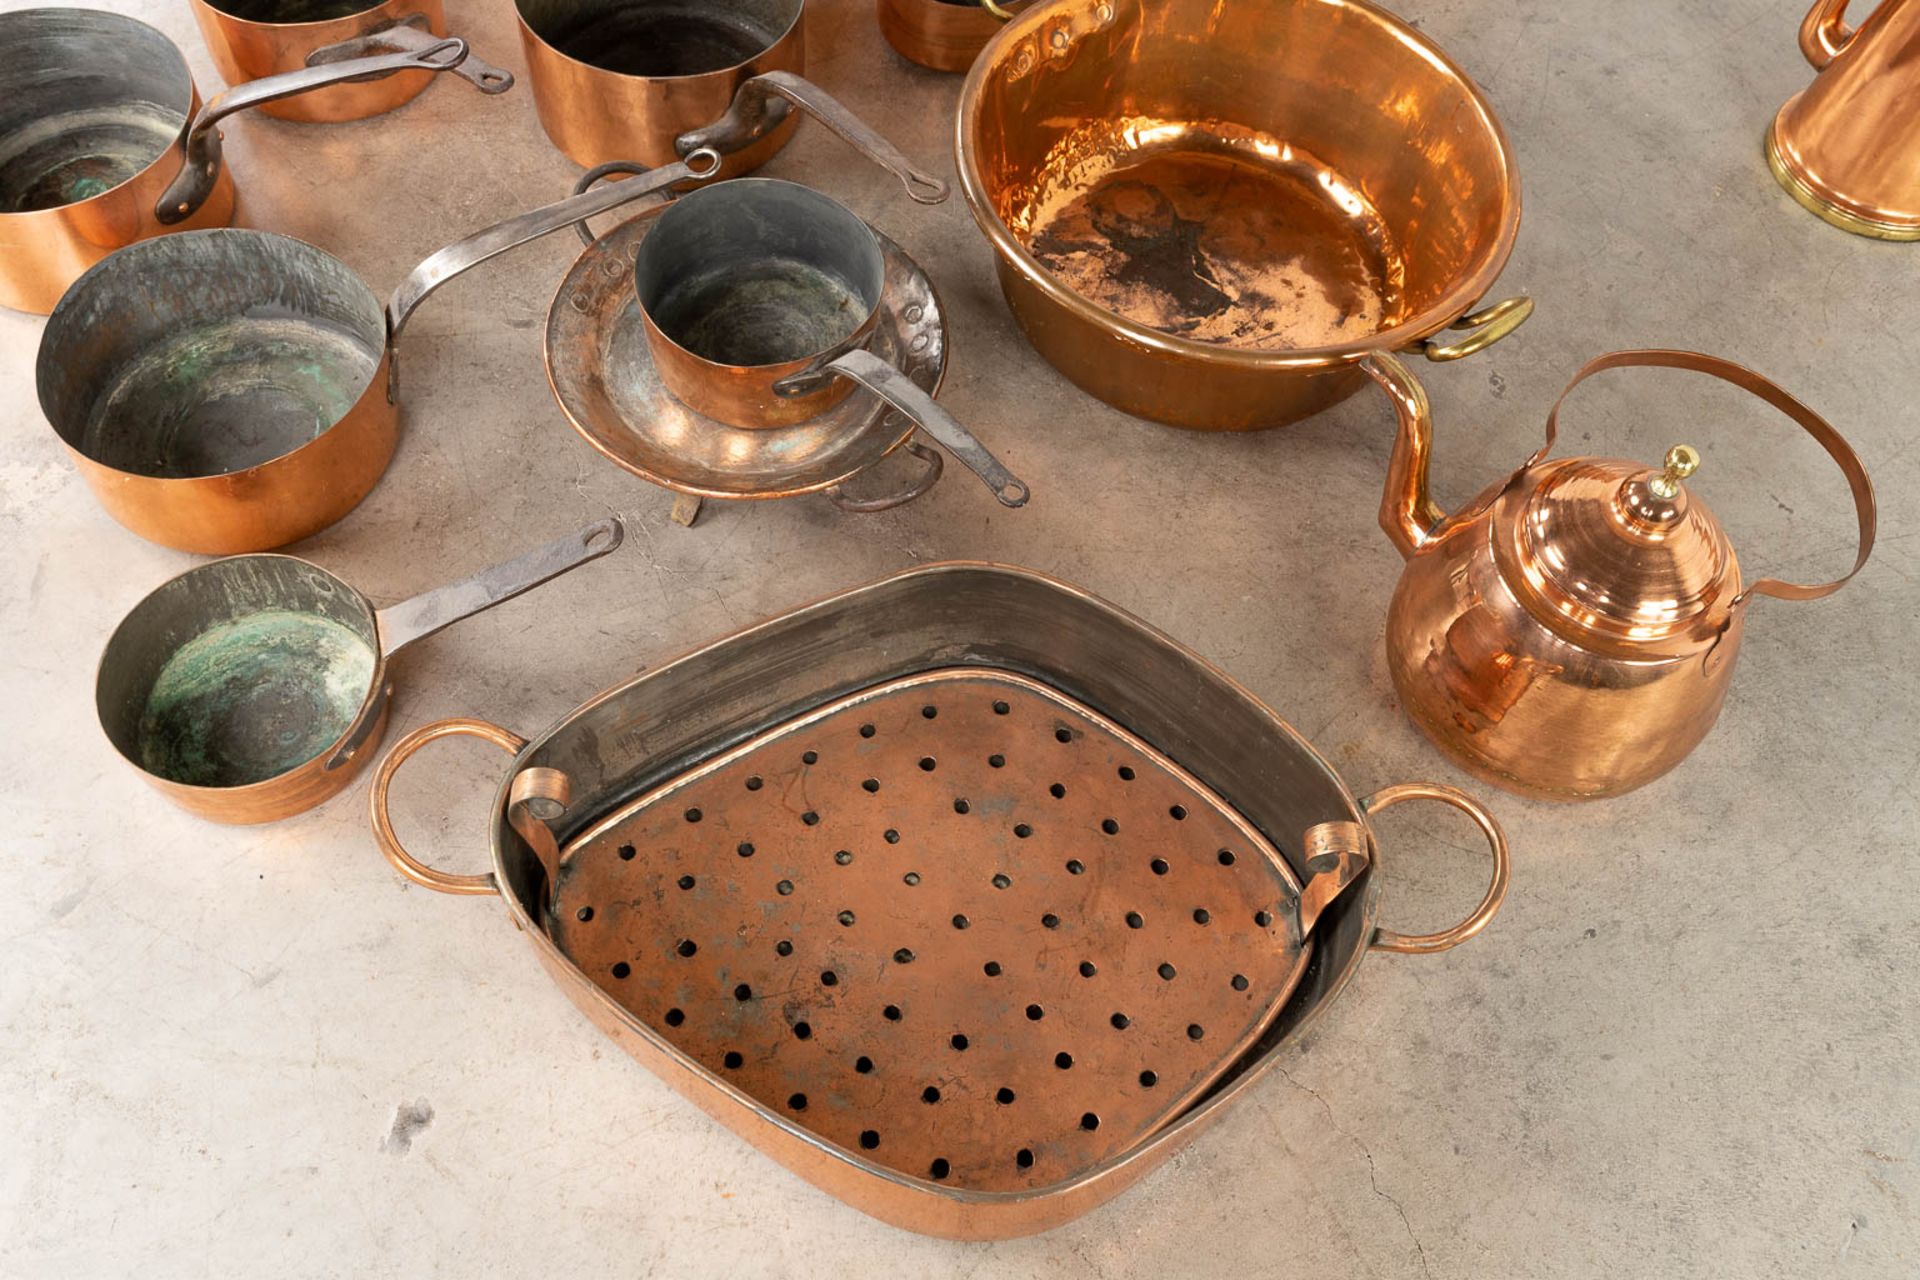 A collection of copper accessories and kitchen utensils. (W:47 x H:40 x D:35 cm) - Image 4 of 11